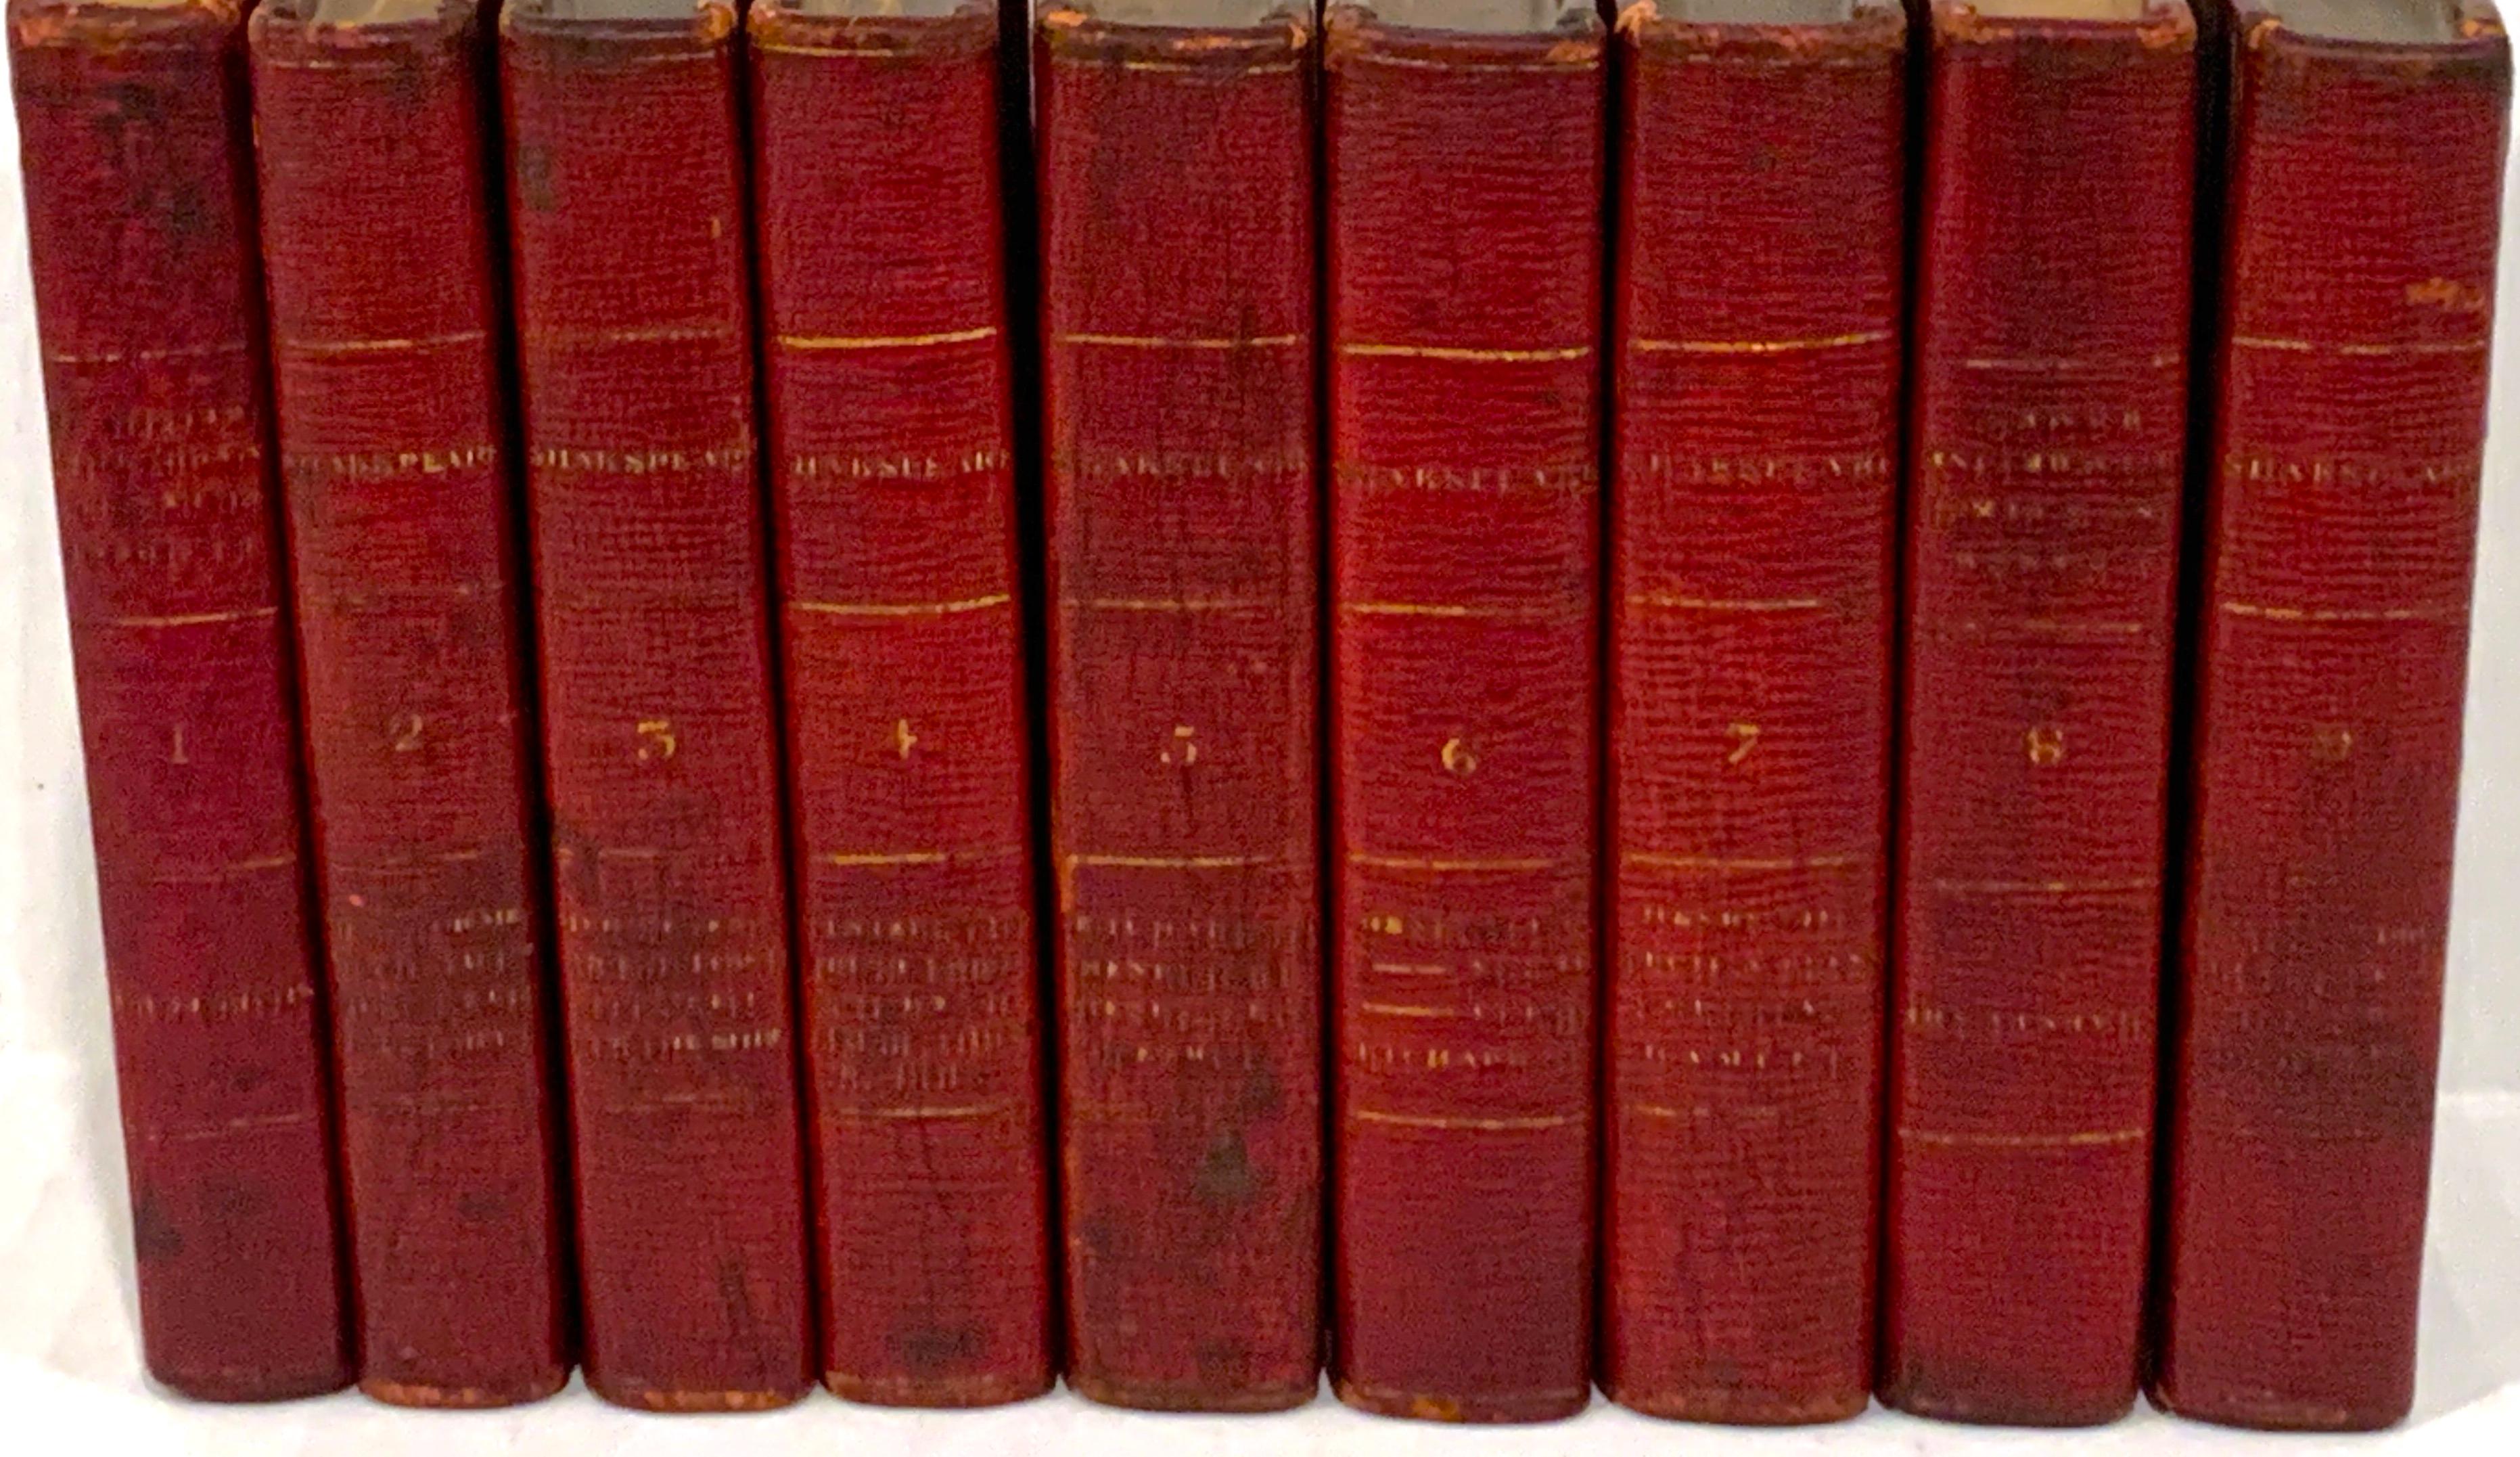 William Shakespeare's Plays in Miniature 9 Volume Leather Bound Volumes, 1803
From the Library of Sir William John Alexander, 3rd Baronet of Queen Victoria's Council.*
Published by London : Printed by C. Whittingham, Dean Street, for John Sharpe,